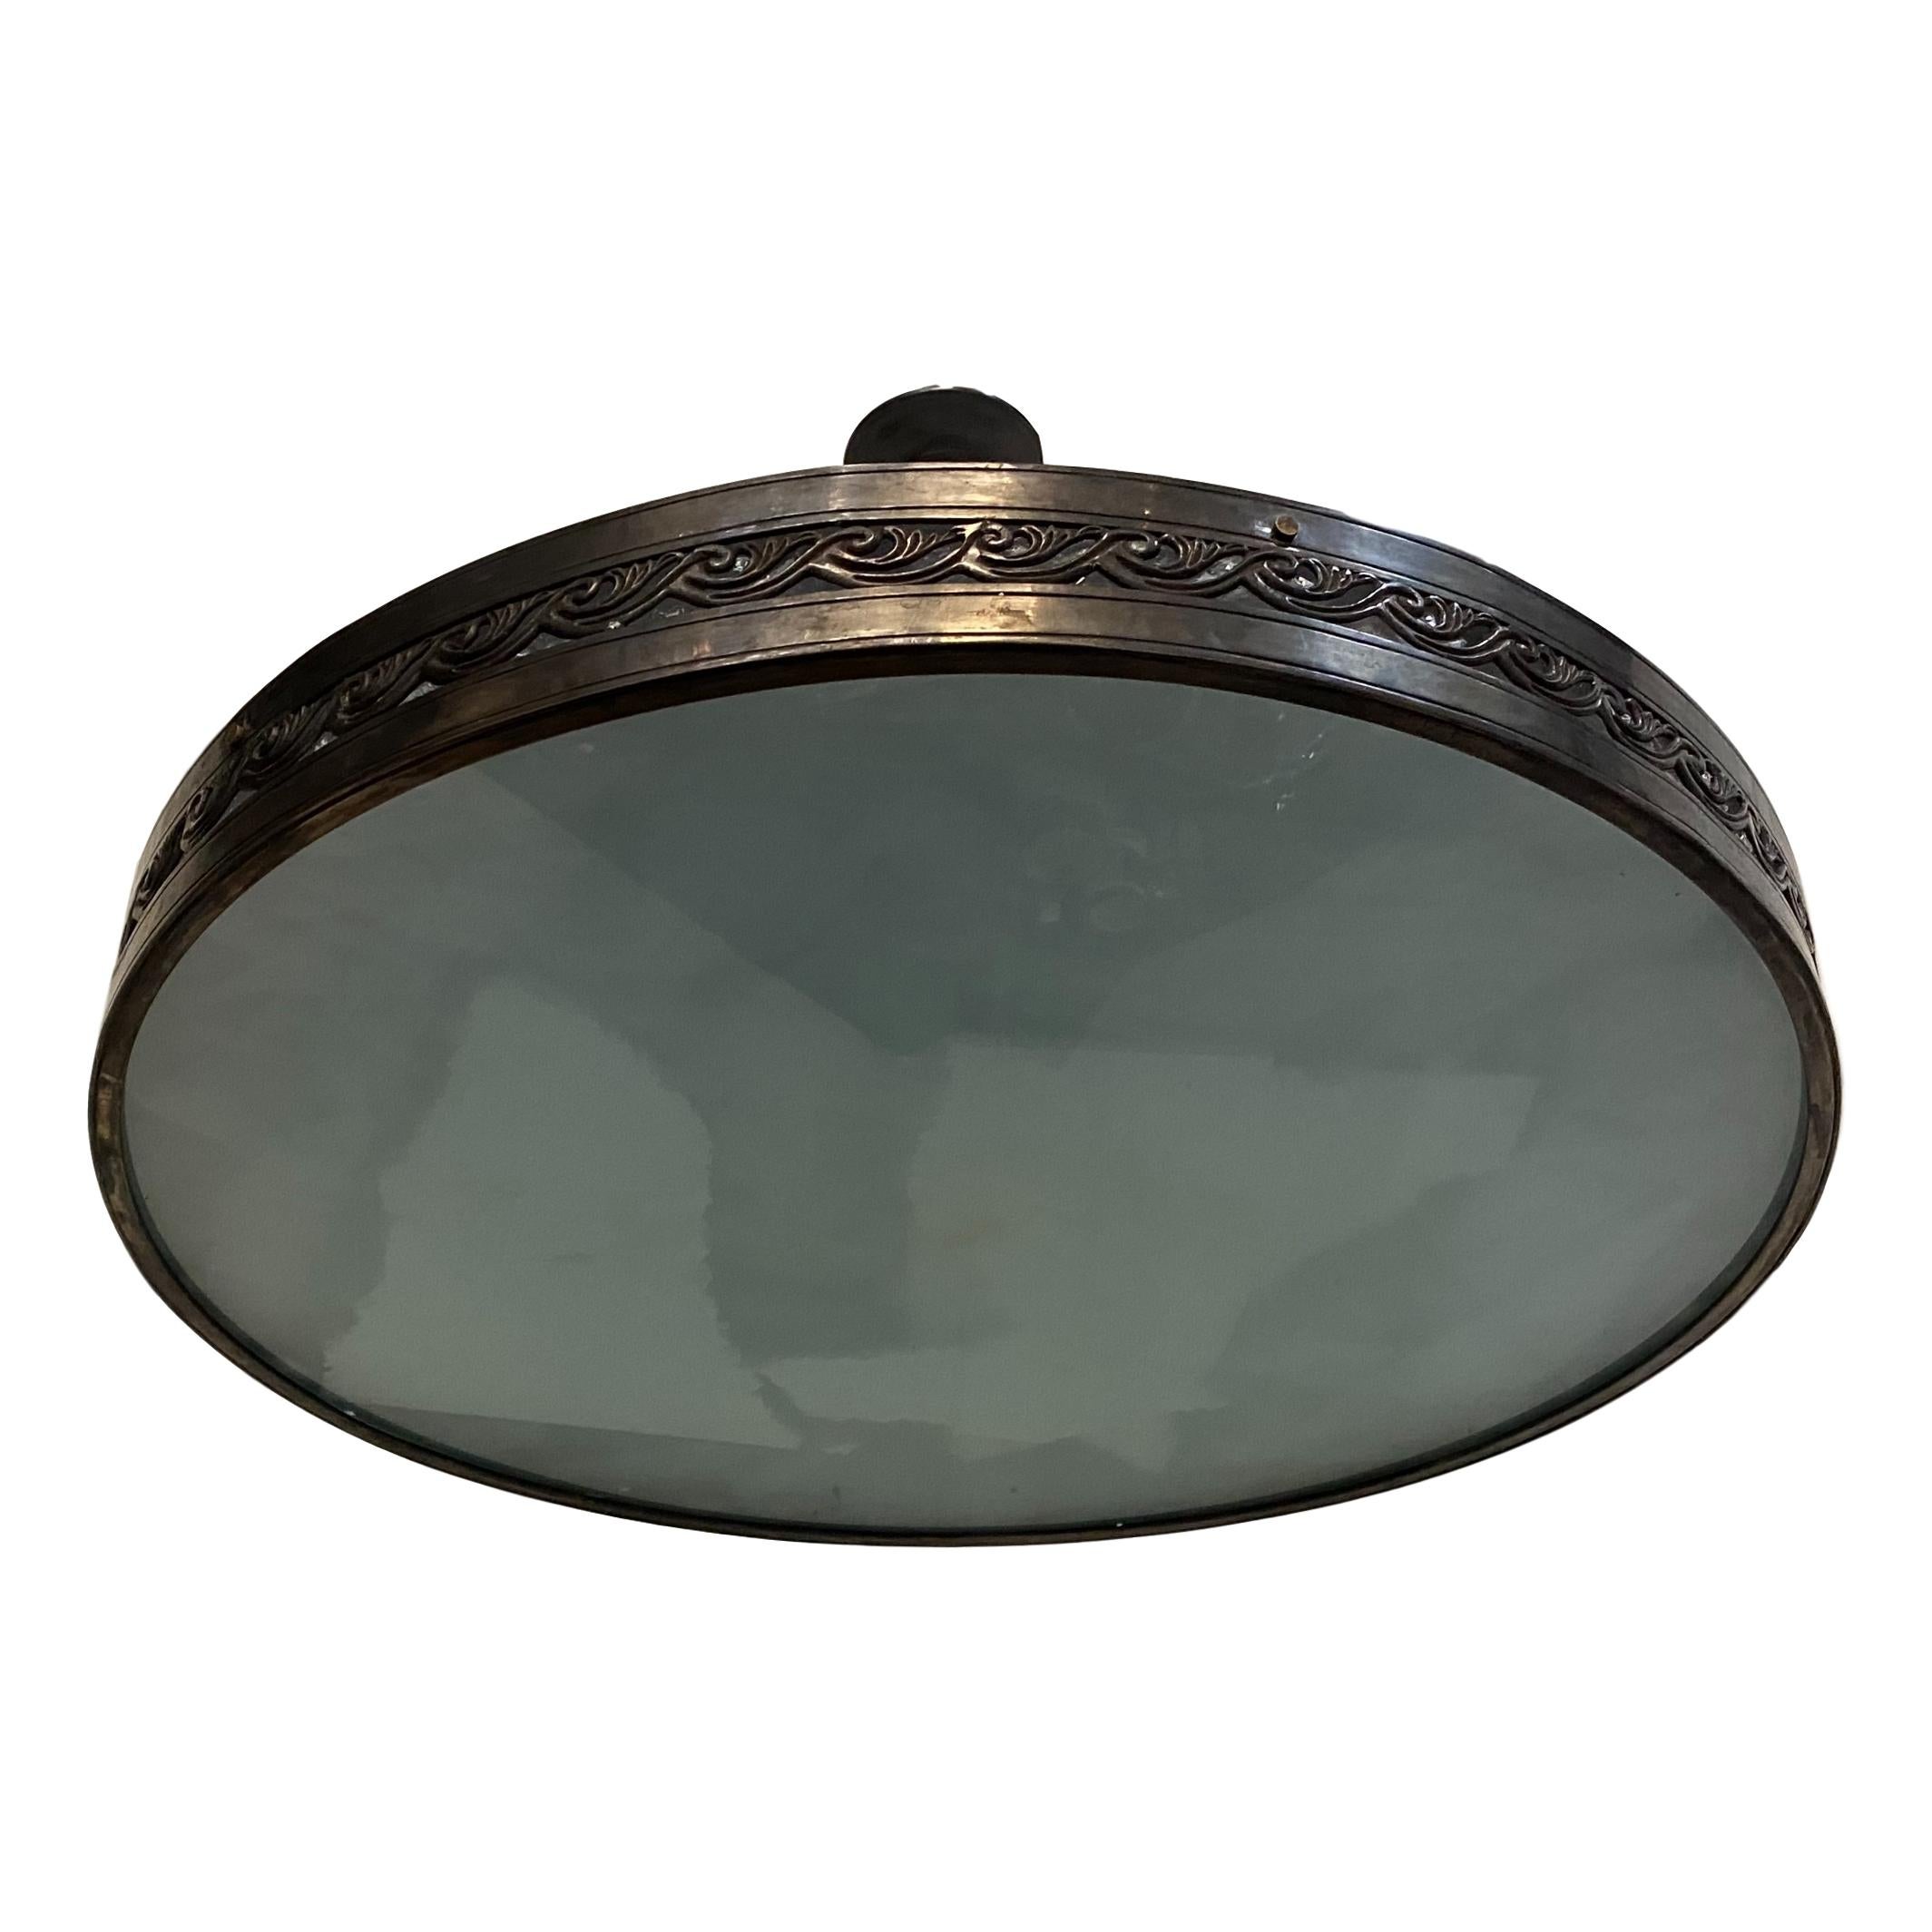 A set of three circa 1920's French patinated bronze semi-flush lights fixtures with frosted glass inset. Sold Individually.

Measurements:
Diameter 36